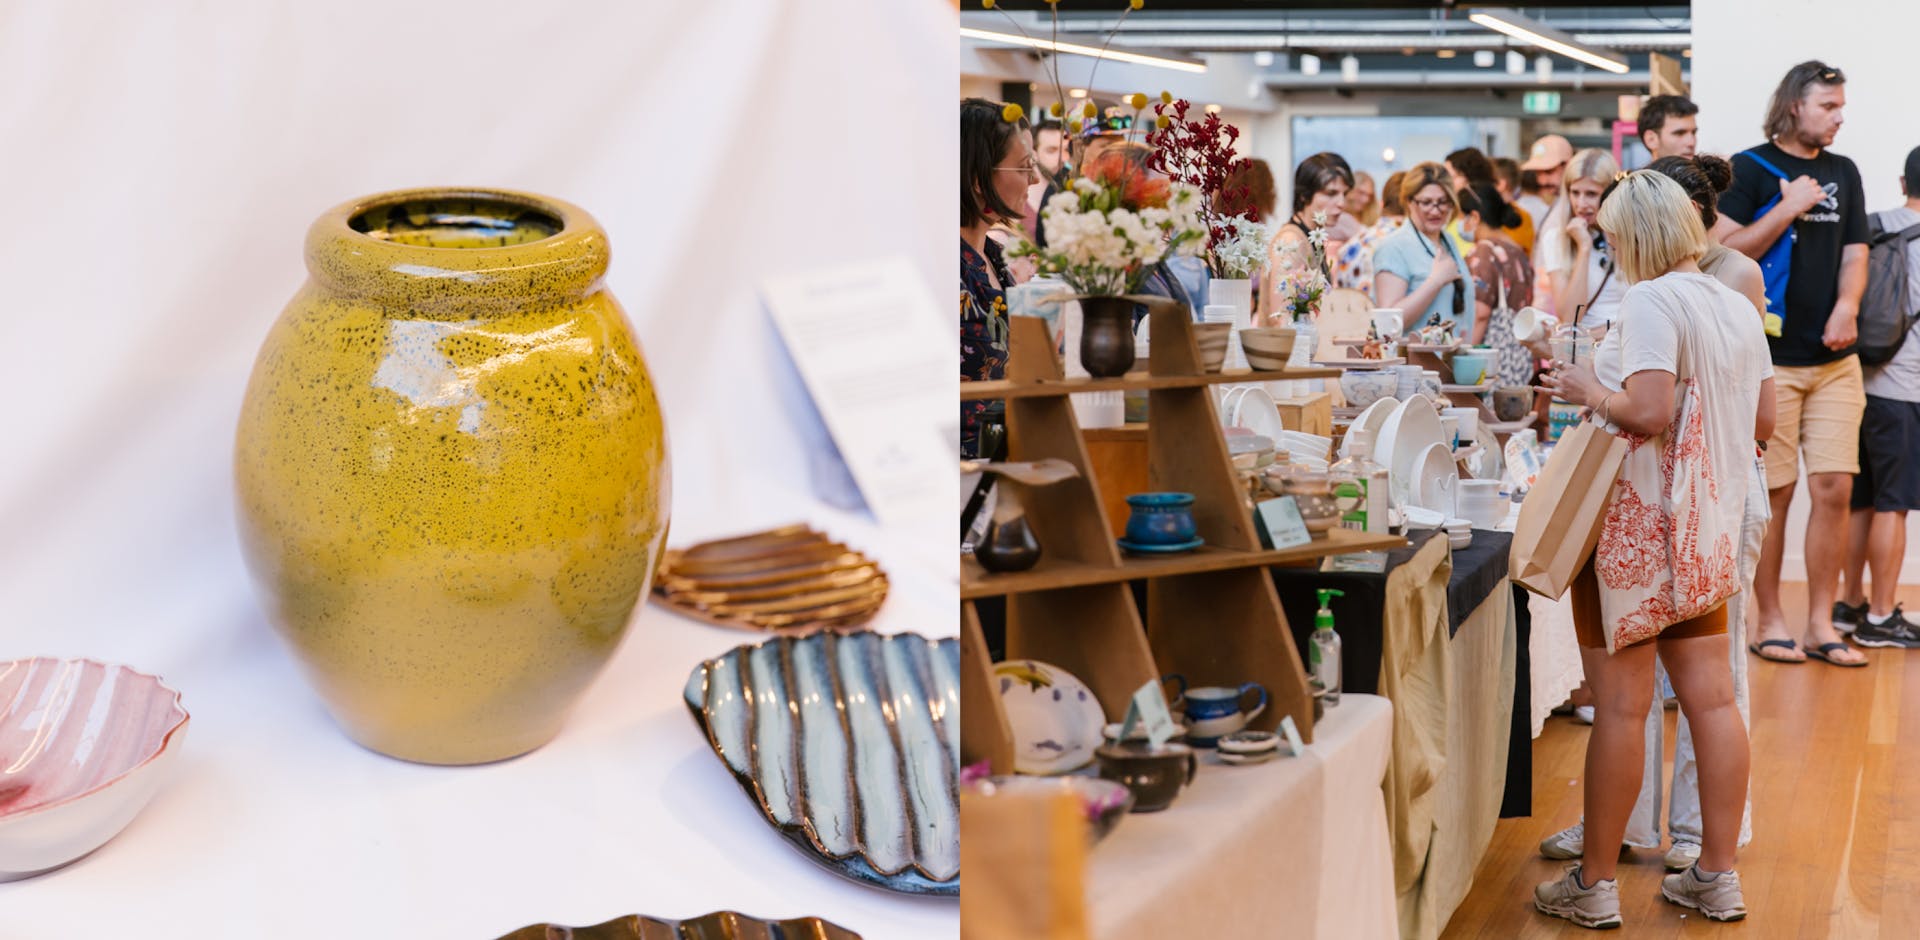 Two images showing a close-up of a coloured ceramic vase and a group of people inspecting ceramic products at Sydney Ceramics Market 2022.